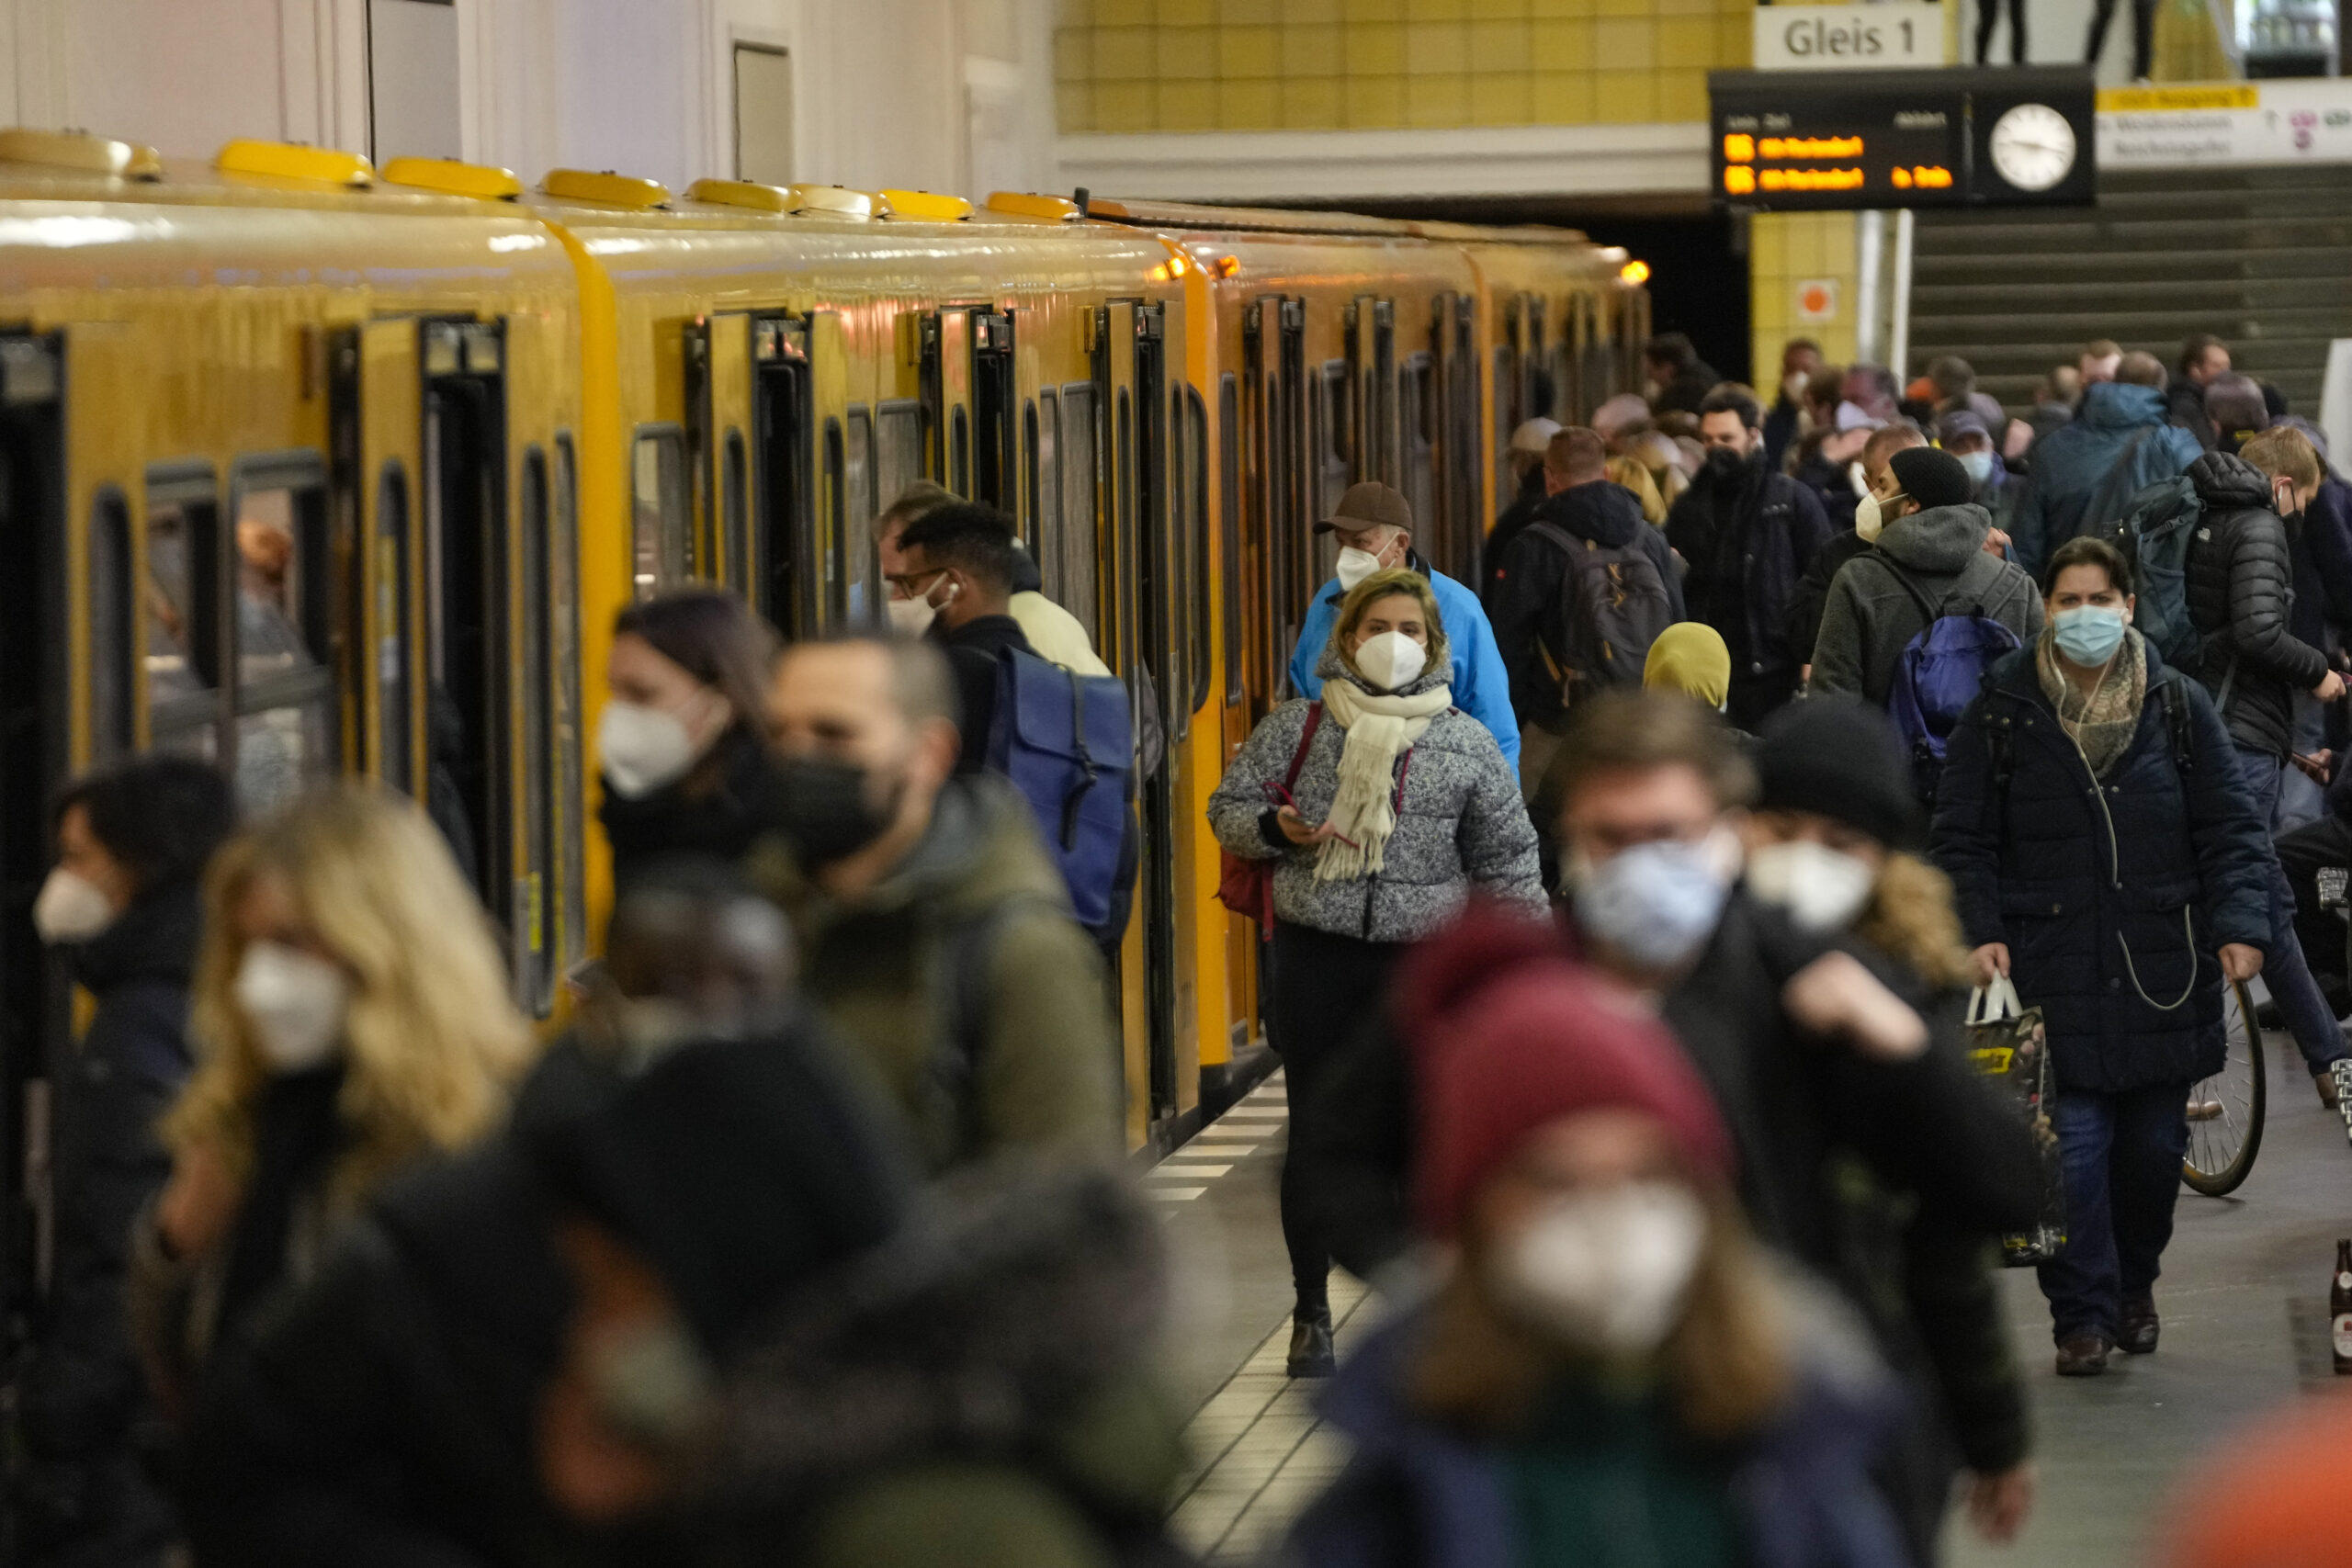 People wear face mask to protect against the coronavirus at the public transport station Friedrichstrasse in Berlin, Germany, Tuesday, Nov. 30, 2021. According to local authorities wearing face masks mandatory in public transport and passengers need to be vaccinated, recovered or tested negative of the coronavirus. (AP Photo/Markus Schreiber)